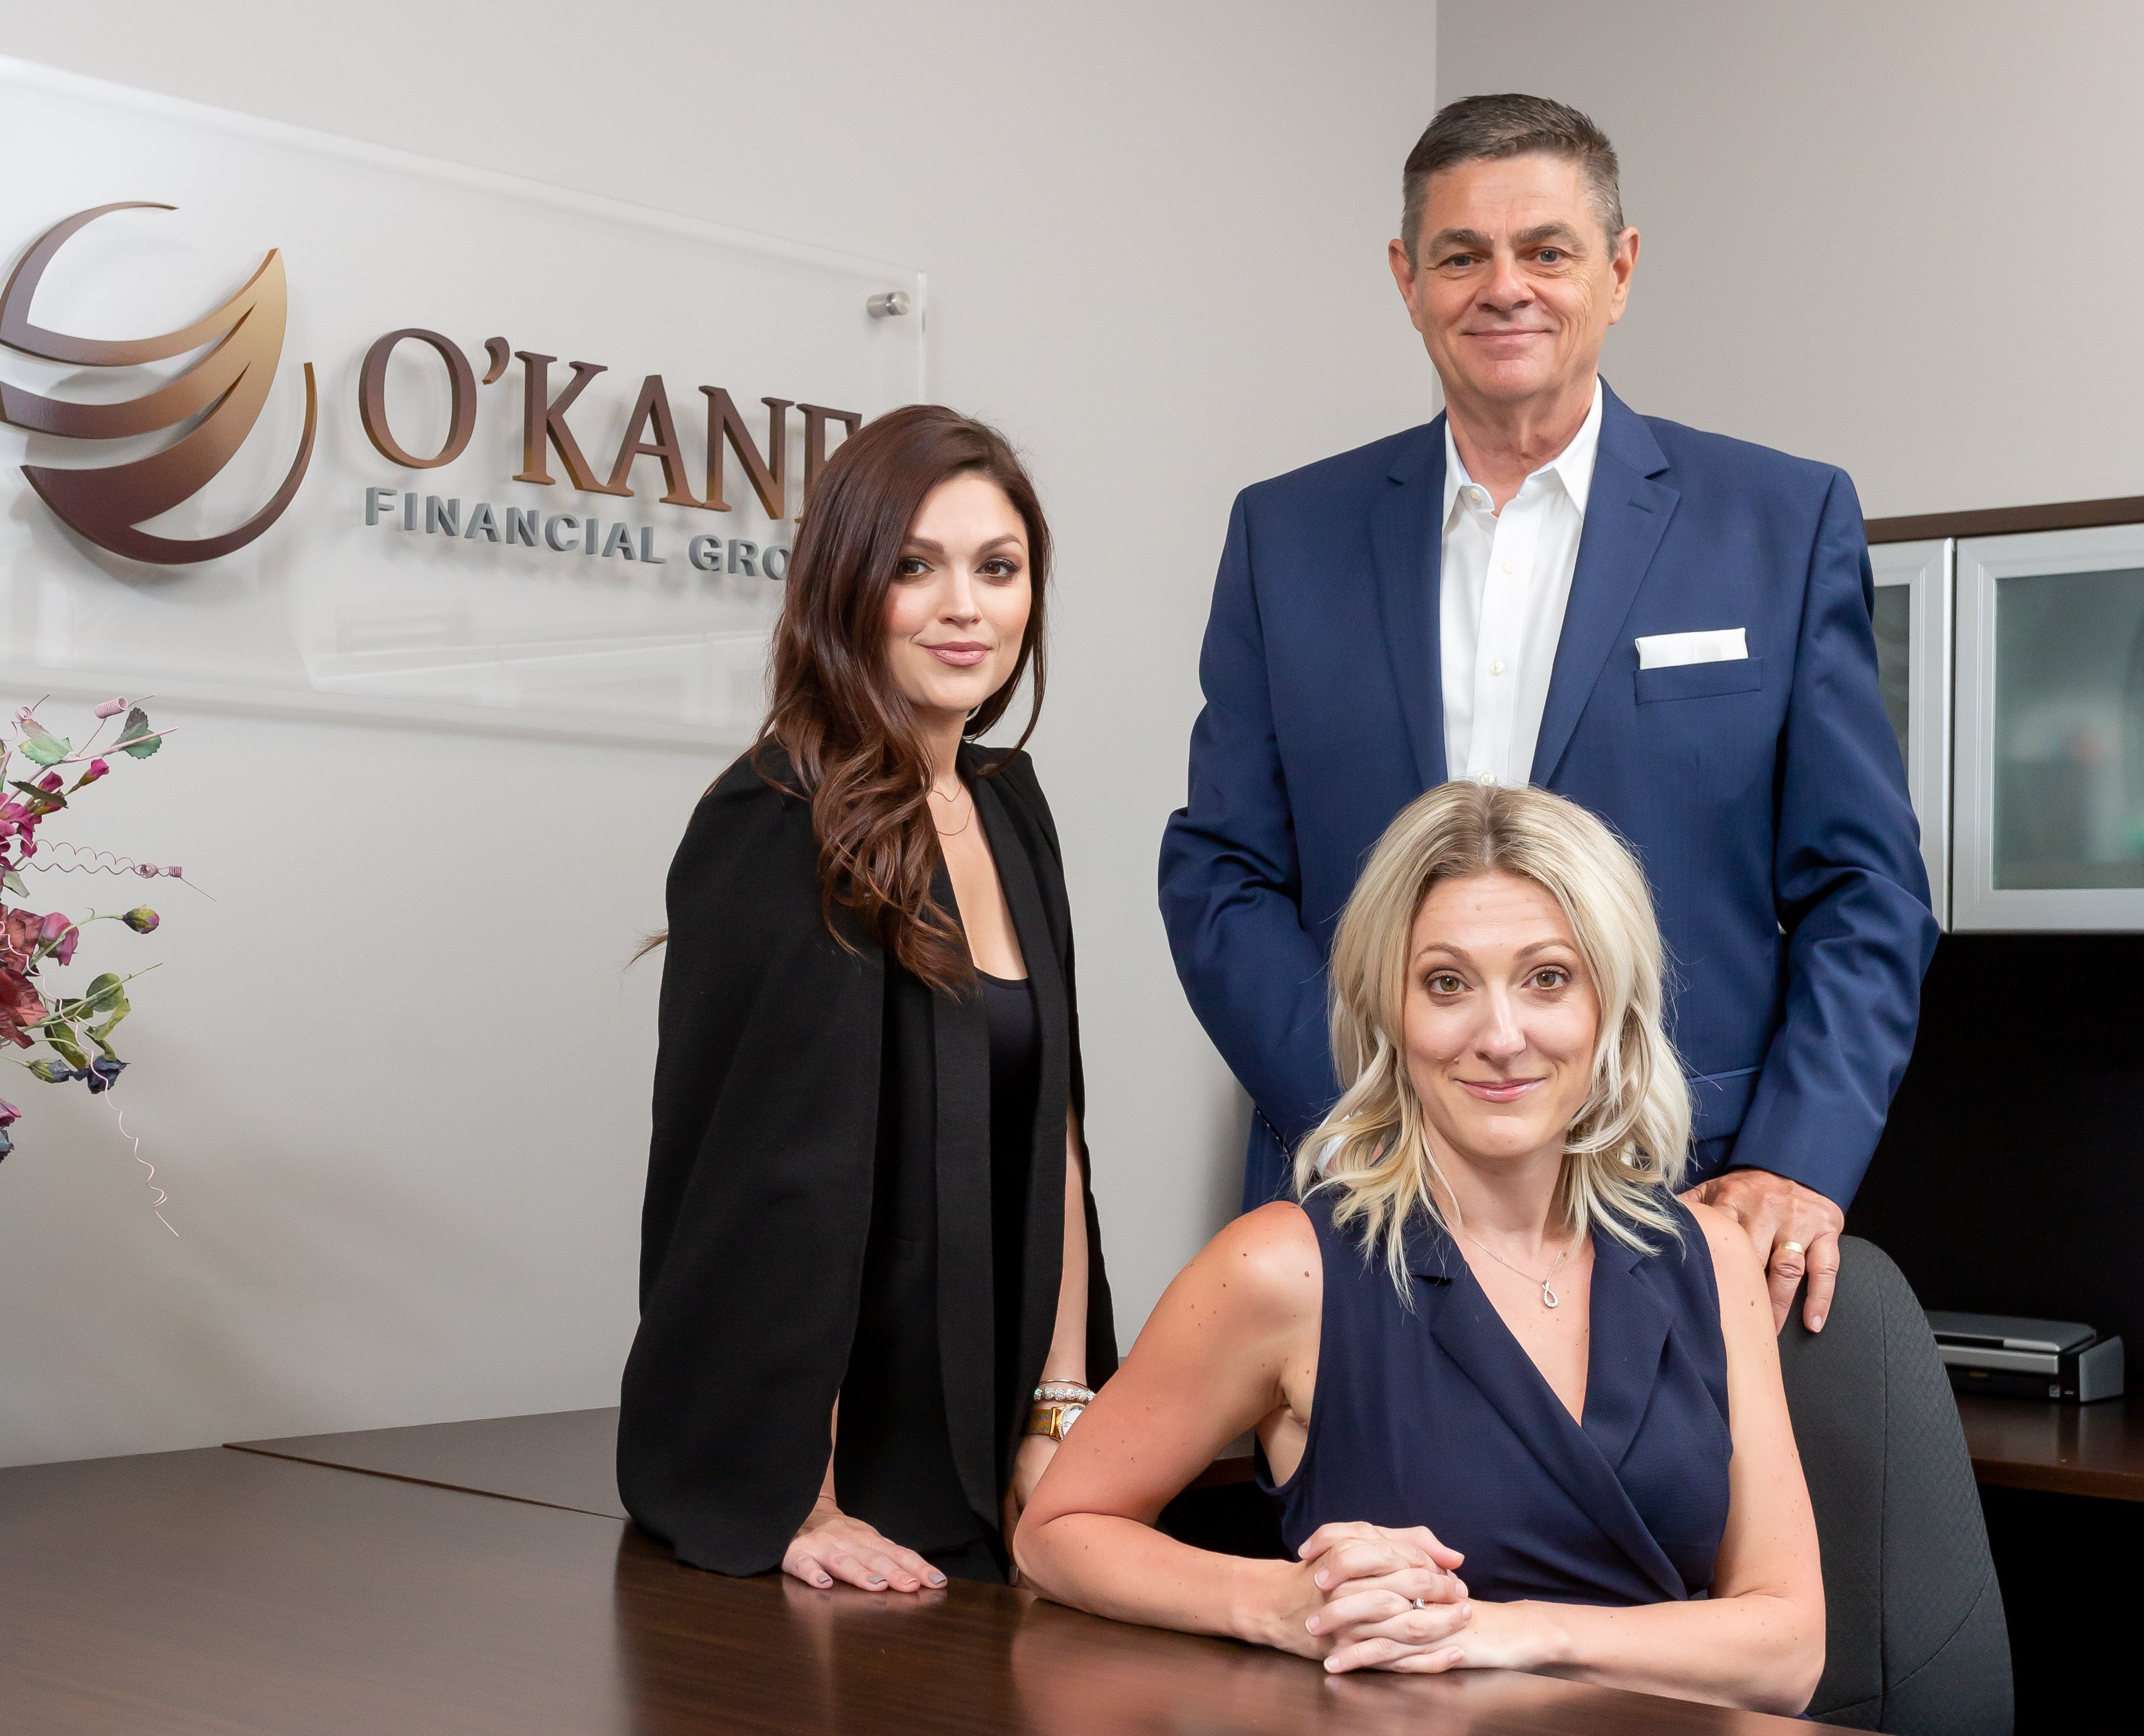 Contact O'Kane Financial Group for a tailored solution to financial and insurance needs.